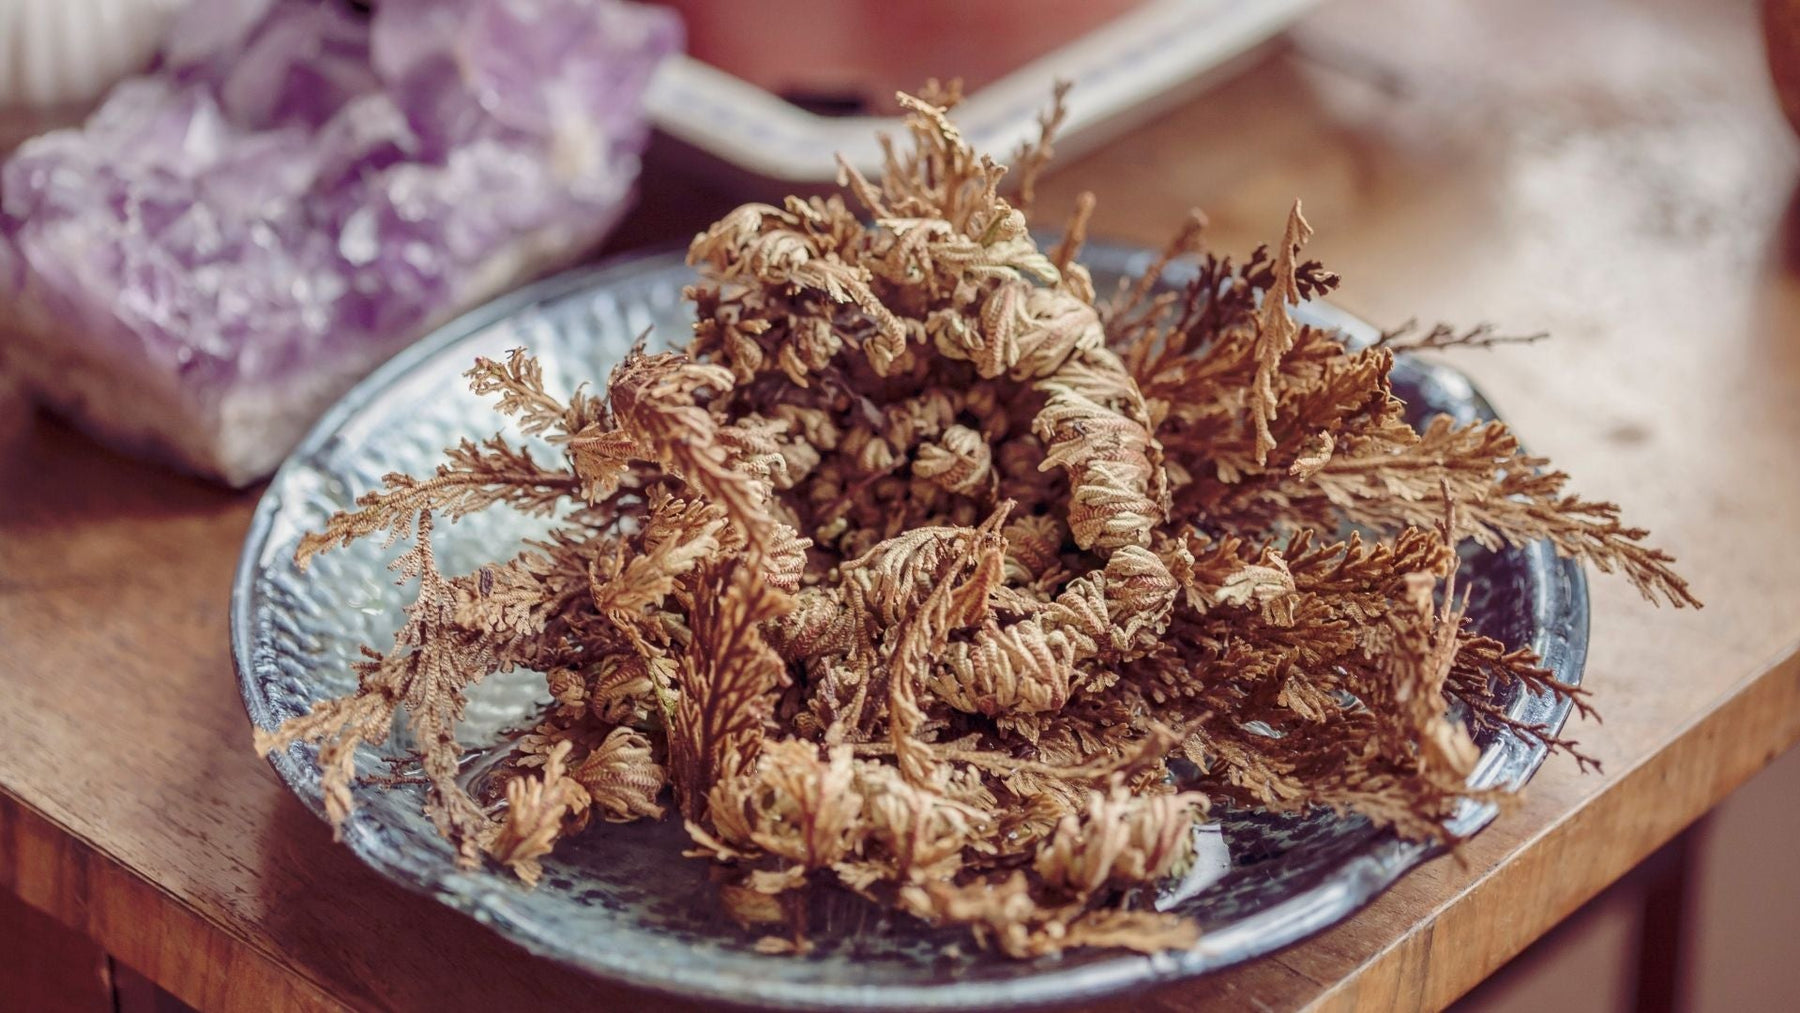 What Does the Rose of Jericho Symbolize?